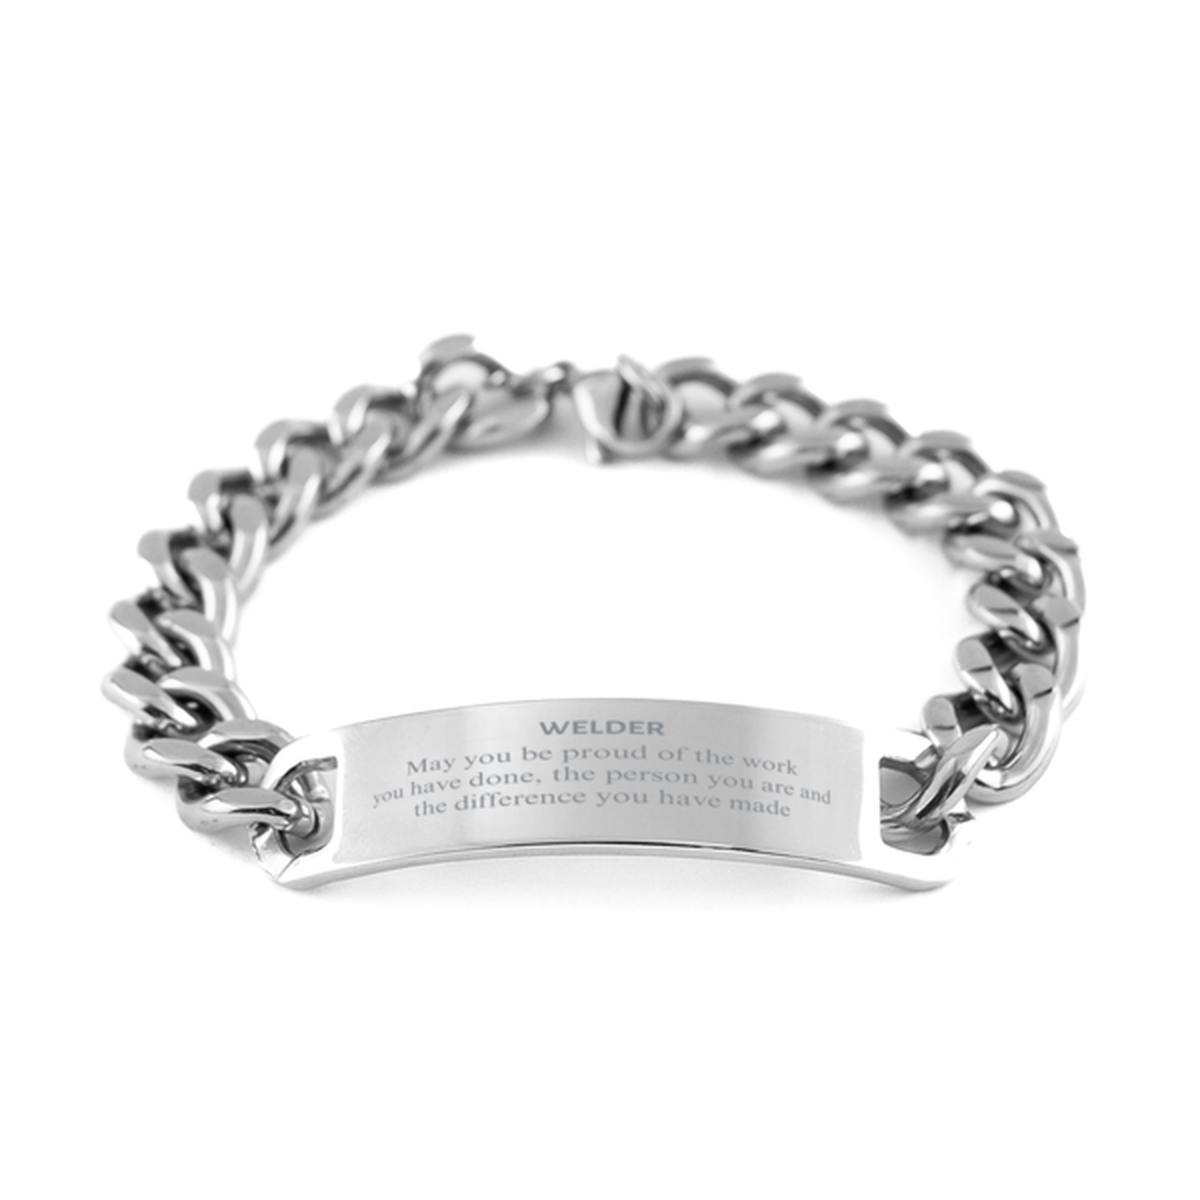 Welder May you be proud of the work you have done, Retirement Welder Cuban Chain Stainless Steel Bracelet for Colleague Appreciation Gifts Amazing for Welder